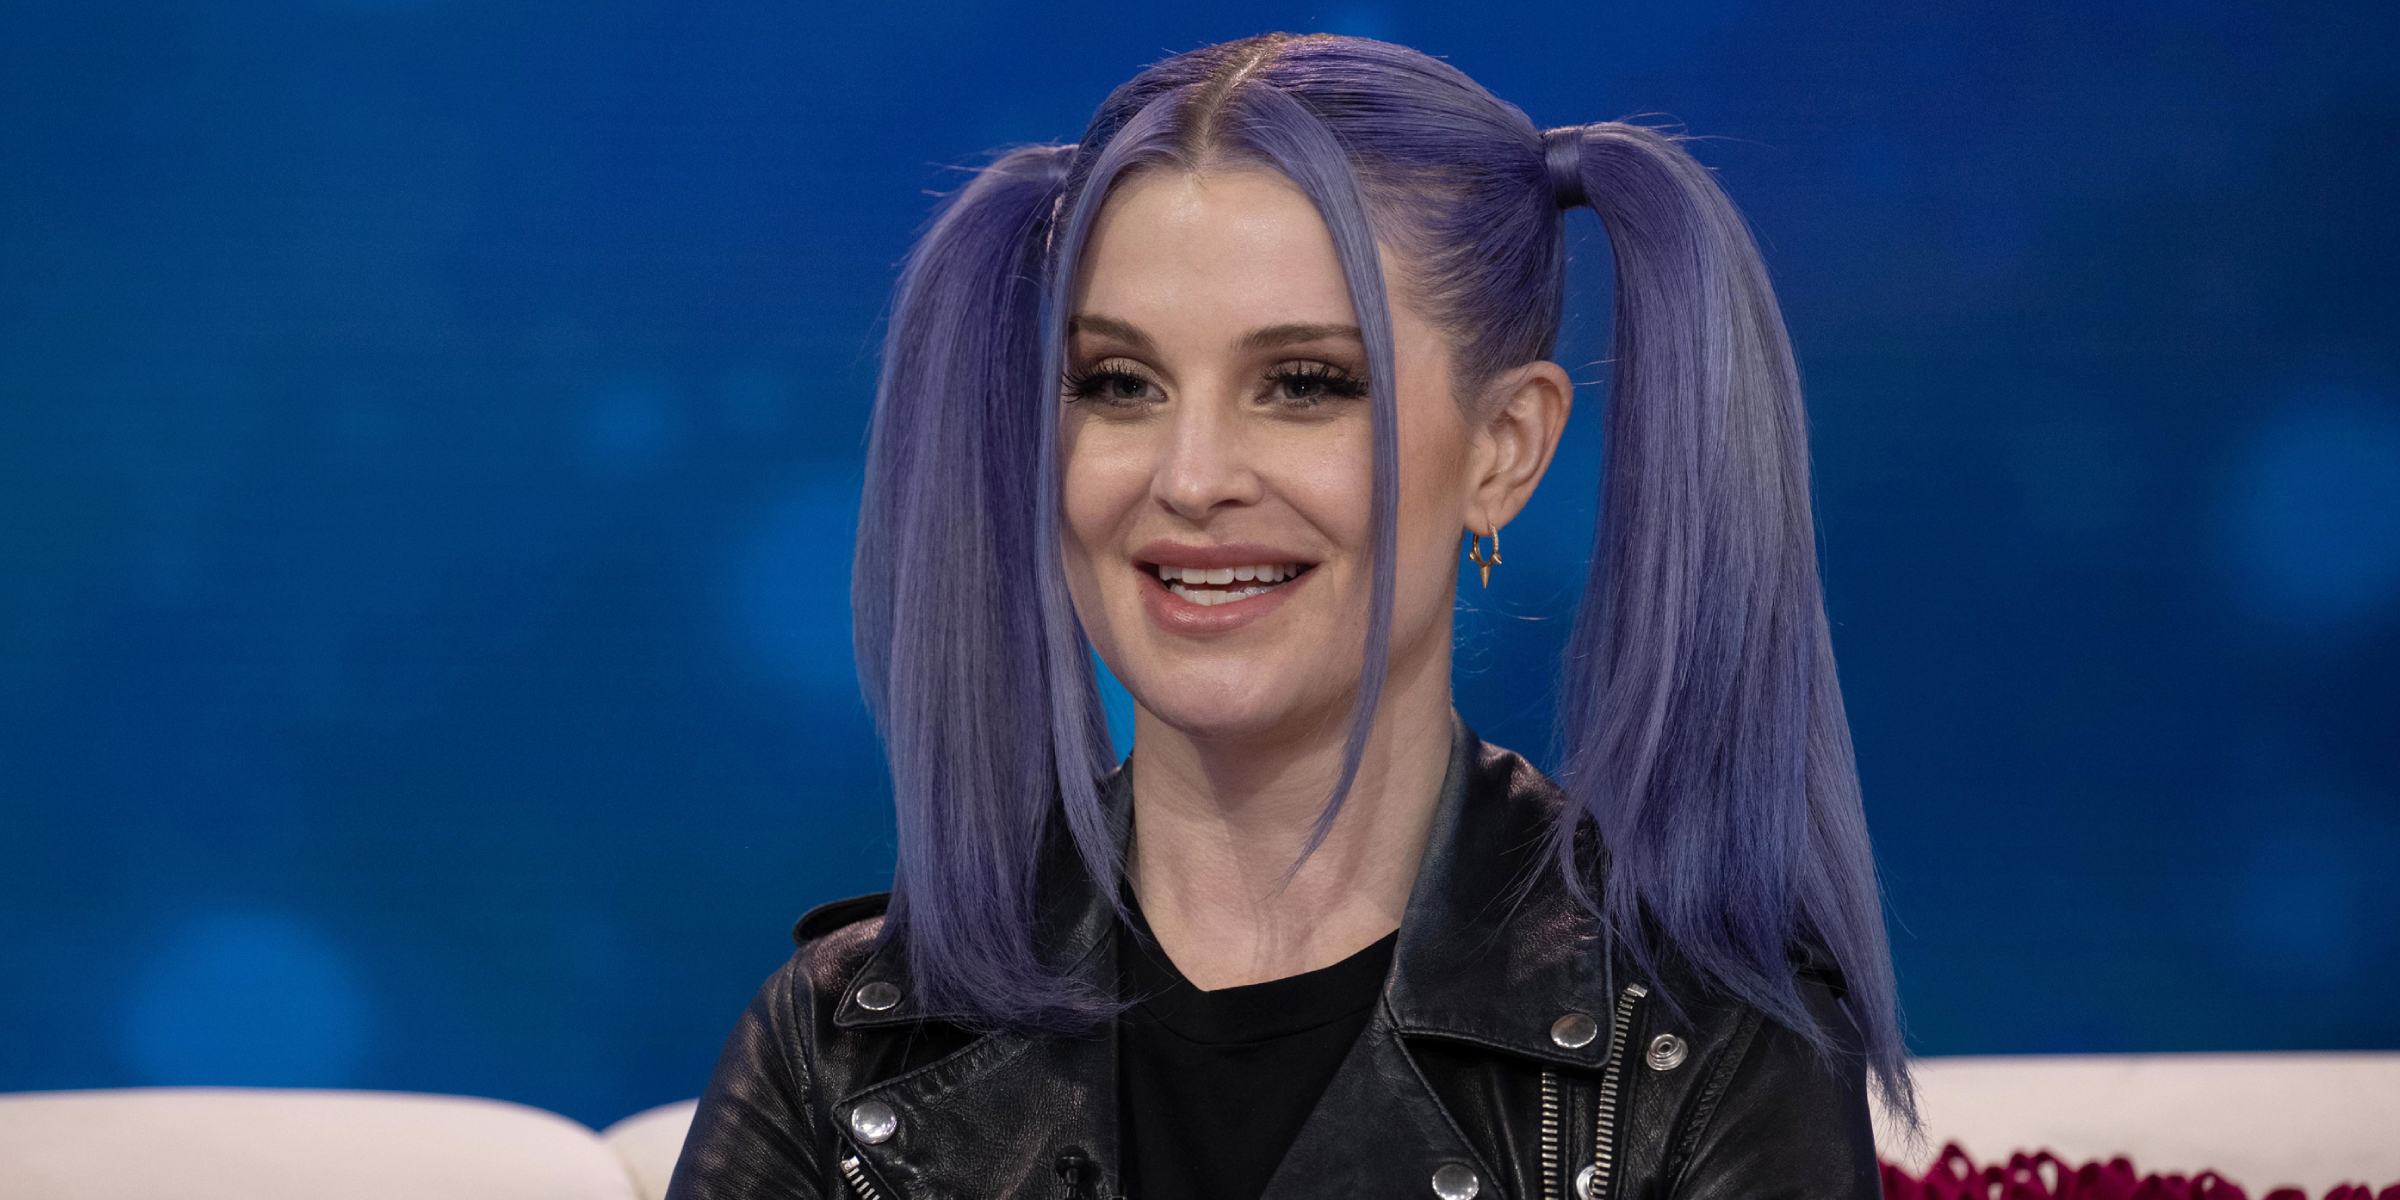 Kelly Osbourne | Source: Getty Images